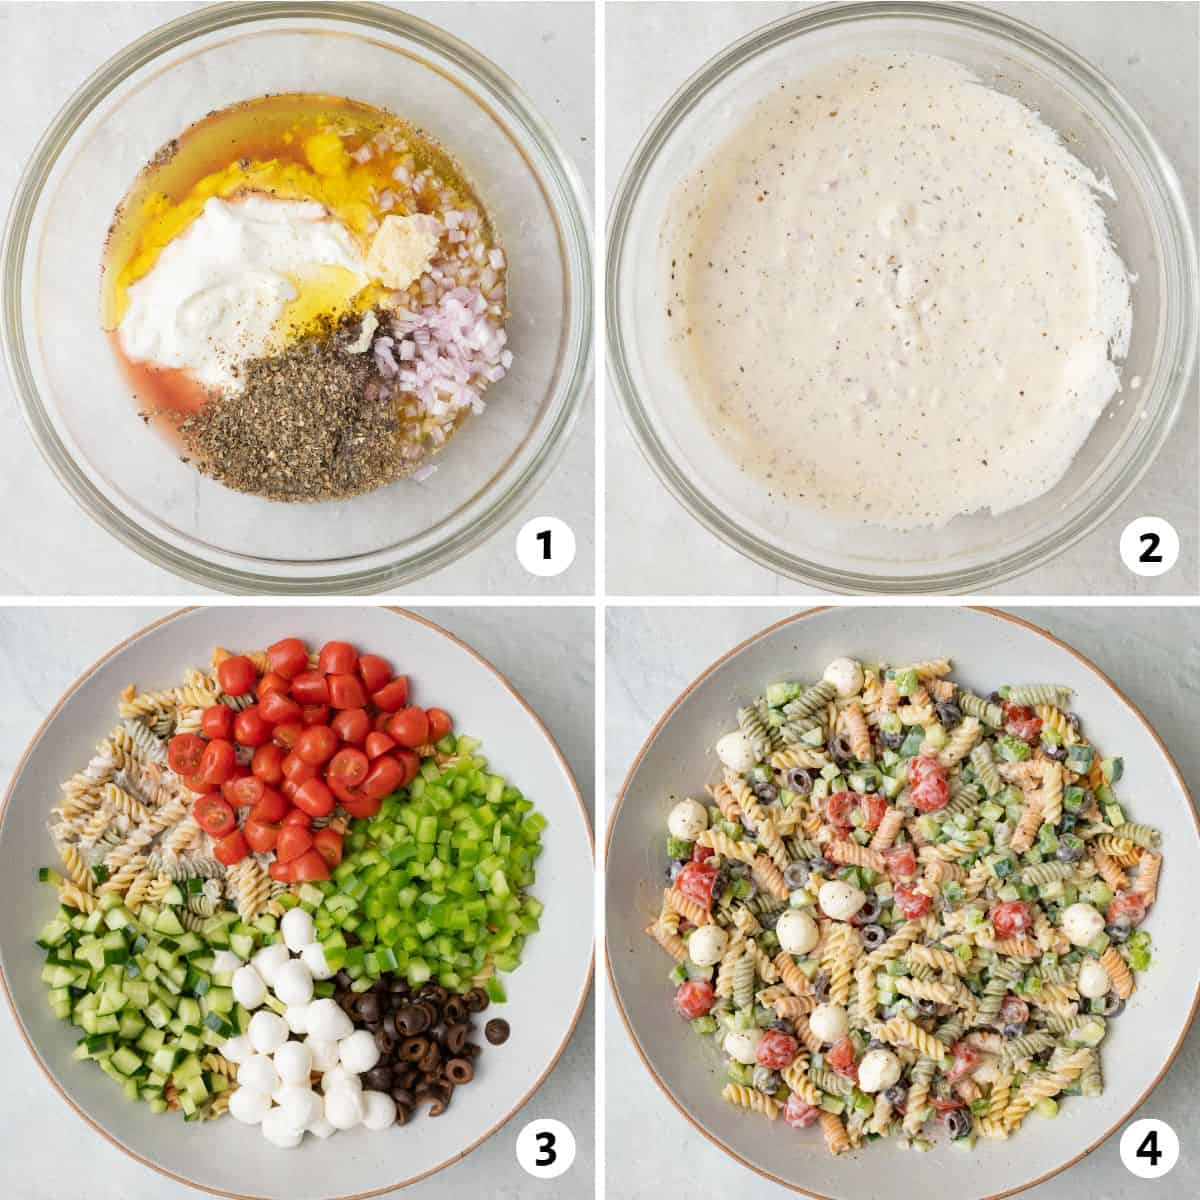 4 image collage making recipe: 1- dressing ingredients added to a bowl before combing, 2- after combining to show a creamy dressing, 3- pasta and vegetables in a serving bowl, prepped and seperated, 4- pasta salad after tossing together with dressing.